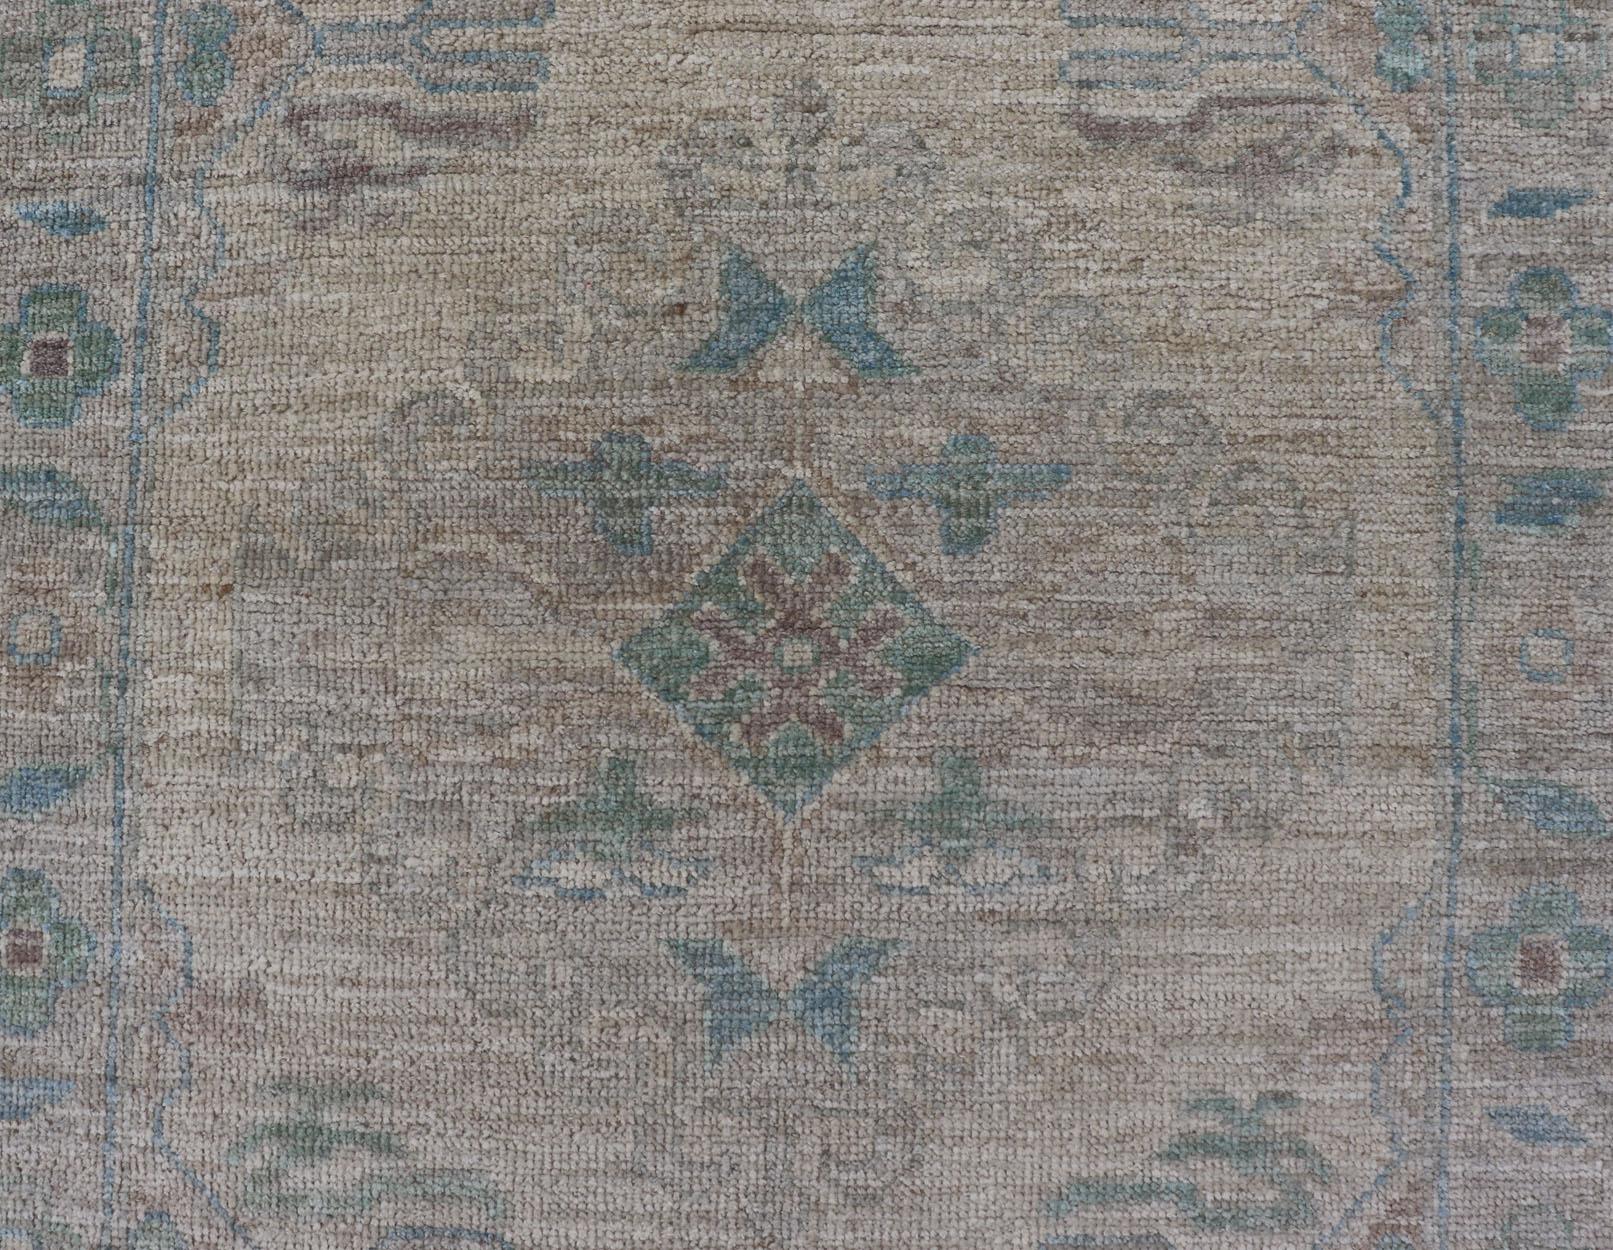 Oushak Runner with Medallion Design on a Cream Field with Blues and Green 3